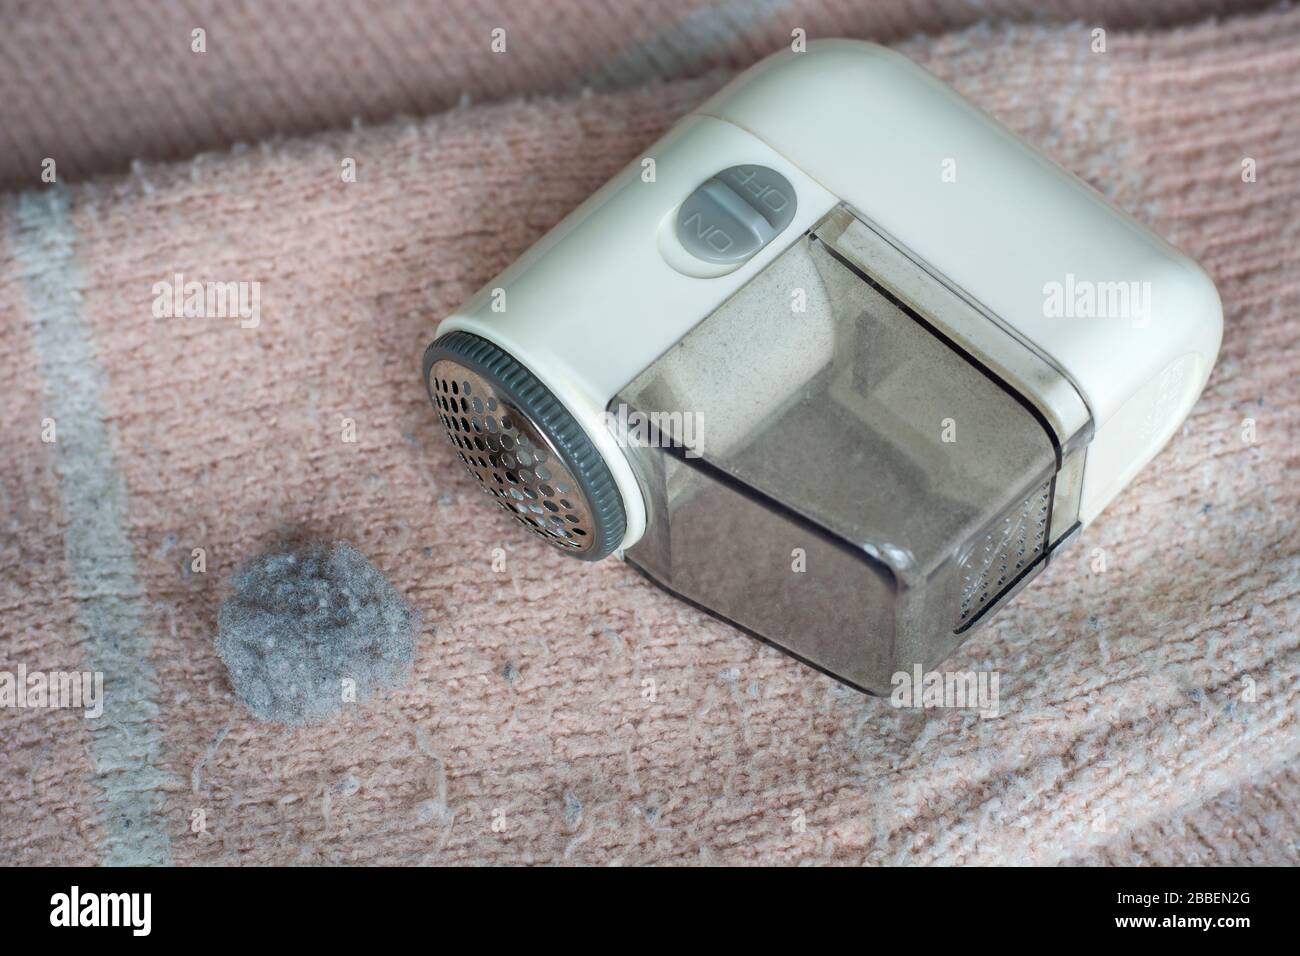 Pilled sweater. Handheld electric fabric shaver fuzz remover device machine for removing fuzz, lint and pills on clothes. Stock Photo